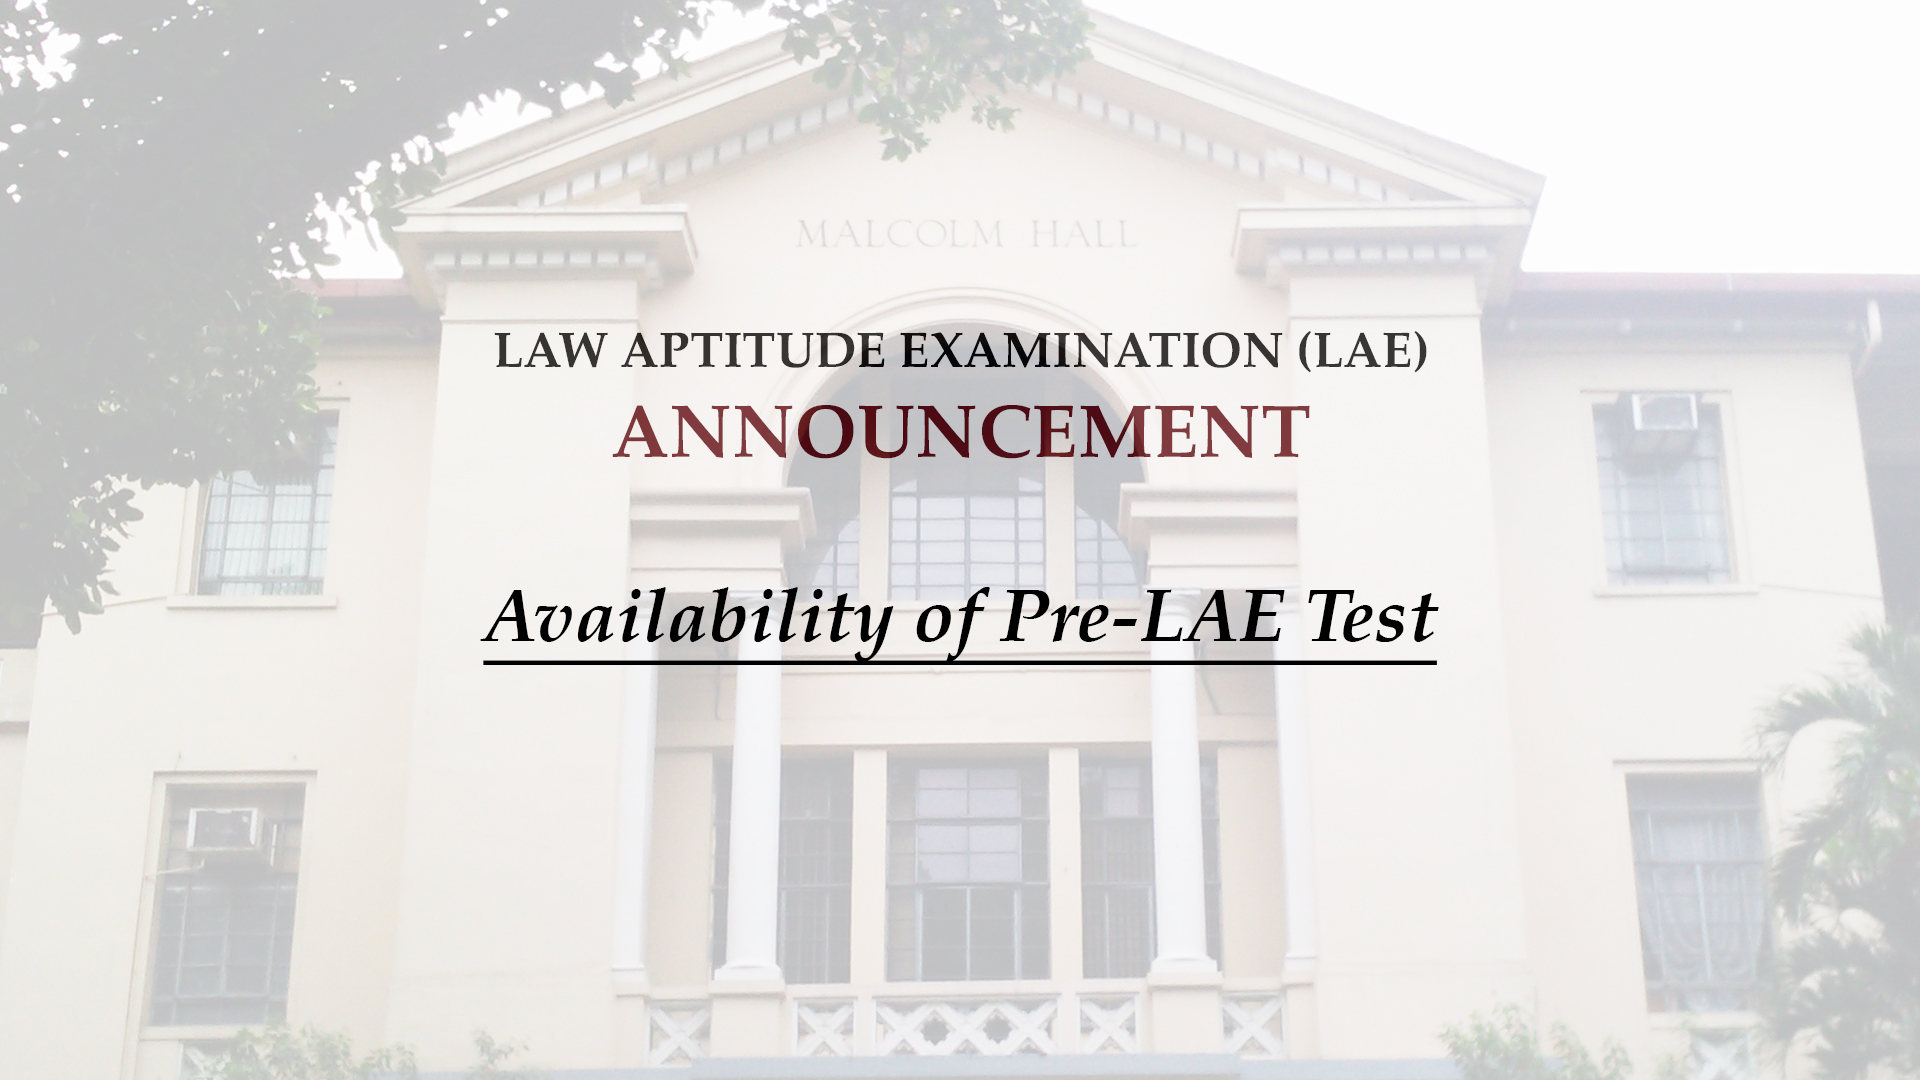 Availability of Pre-LAE Test